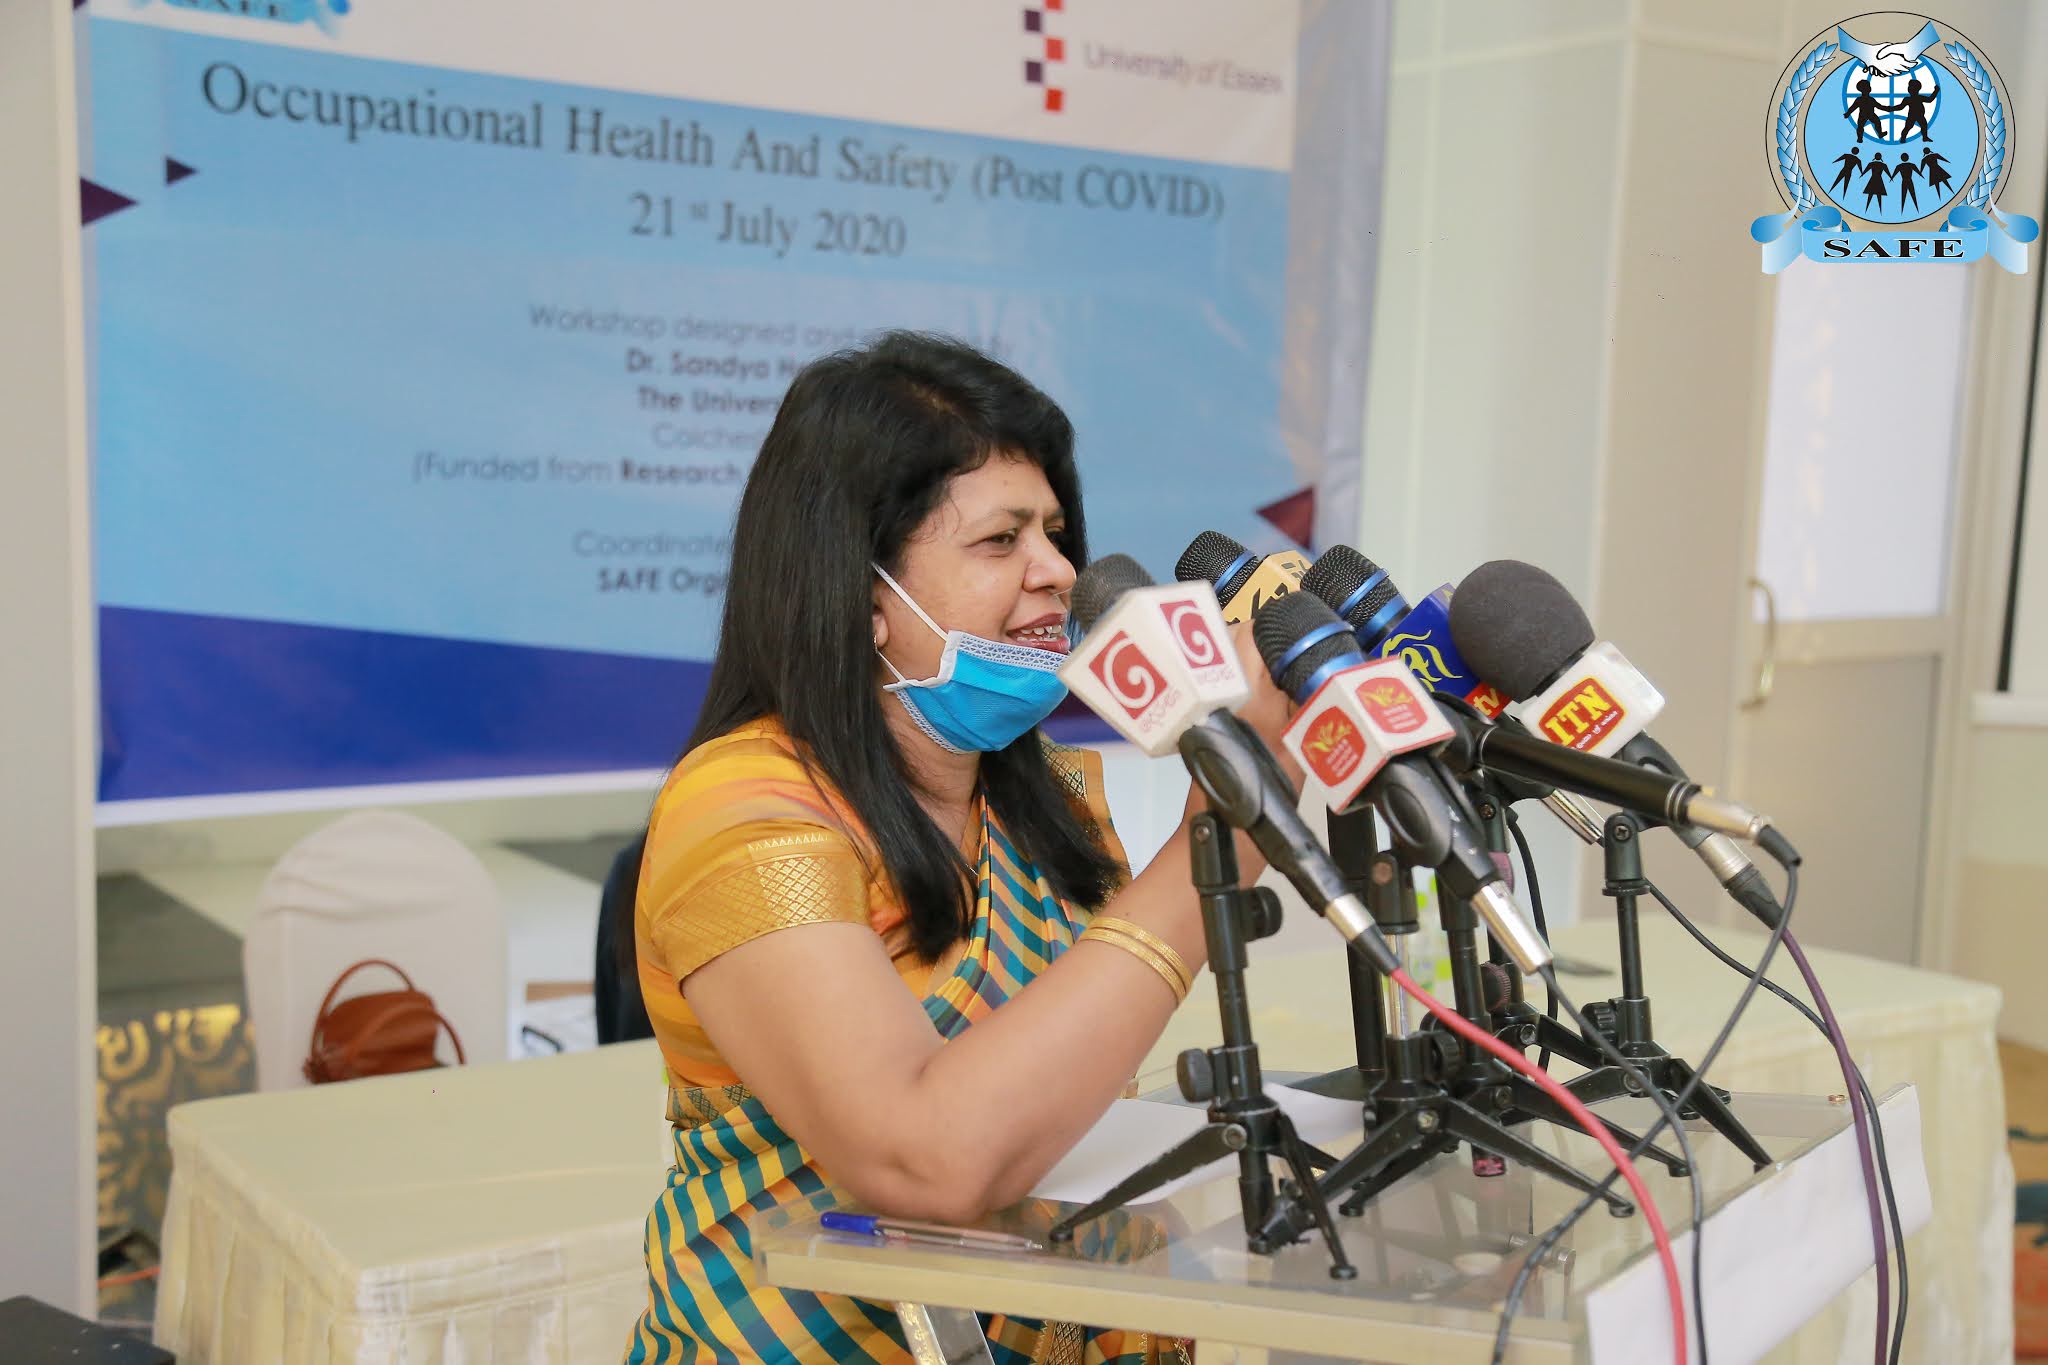  A woman wearing a sari and a face mask is speaking into a microphone with the SAFE and Occupational Health and Safety logos in the background.